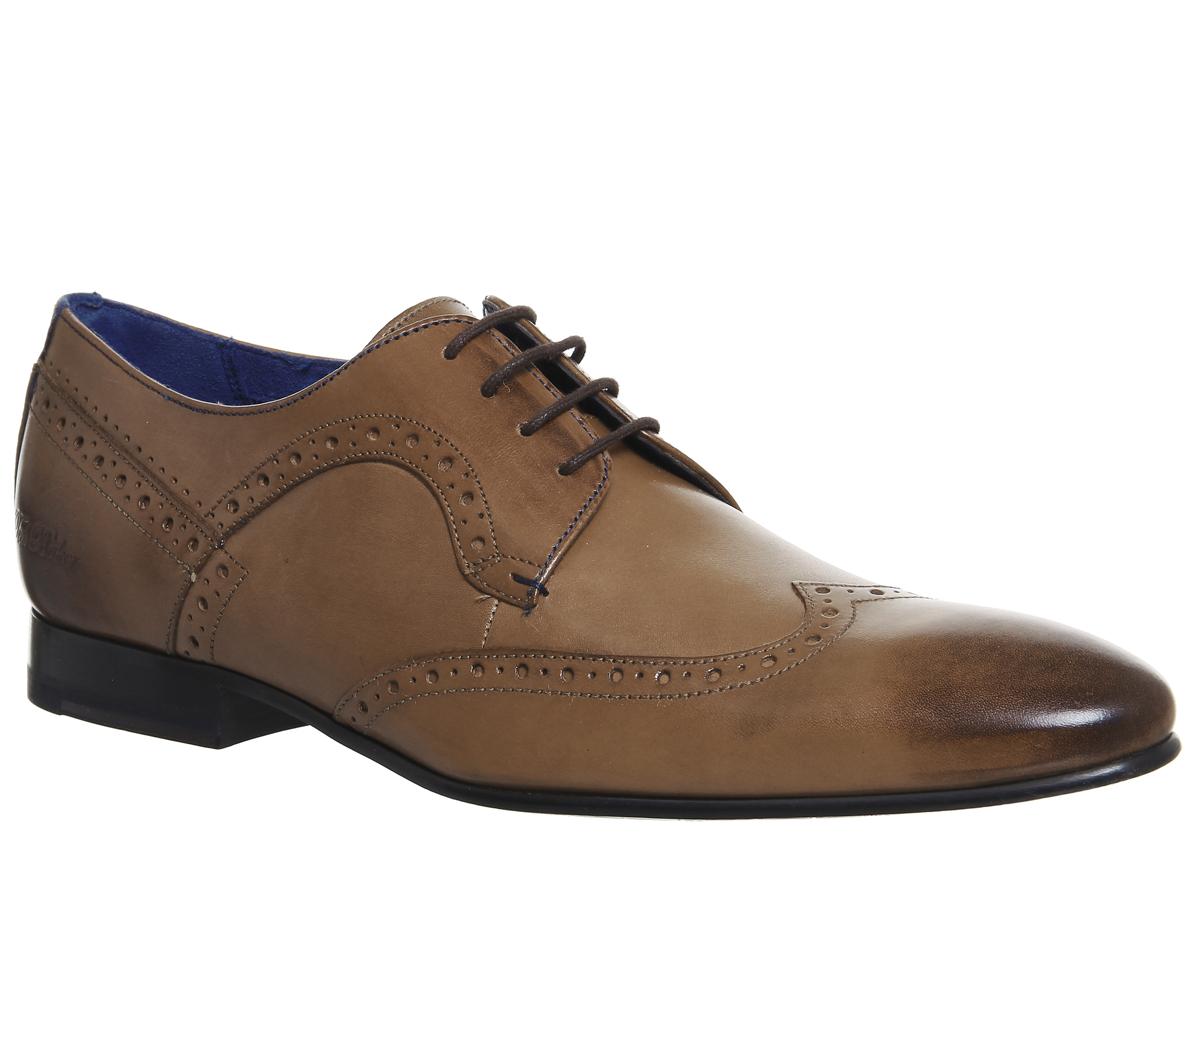 Ted Baker Ollivur Brogues Tan Leather 